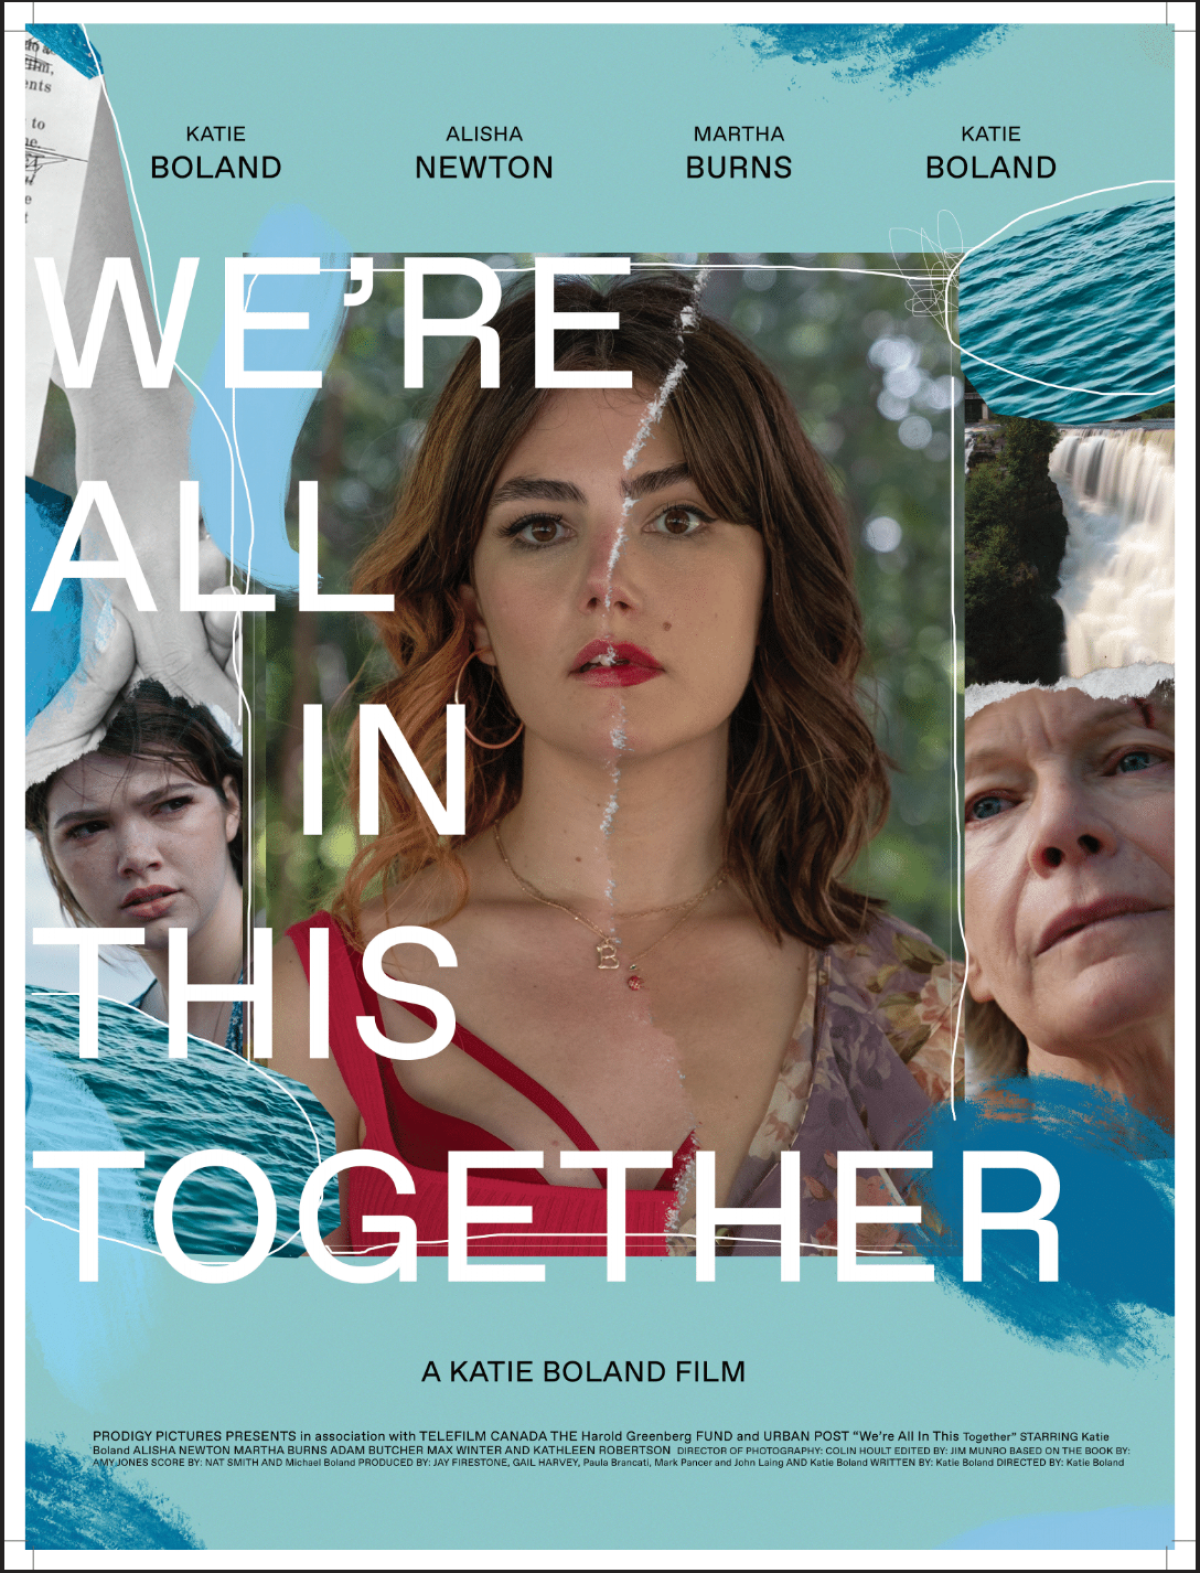 MANIFF 2022: We’re All in This Together